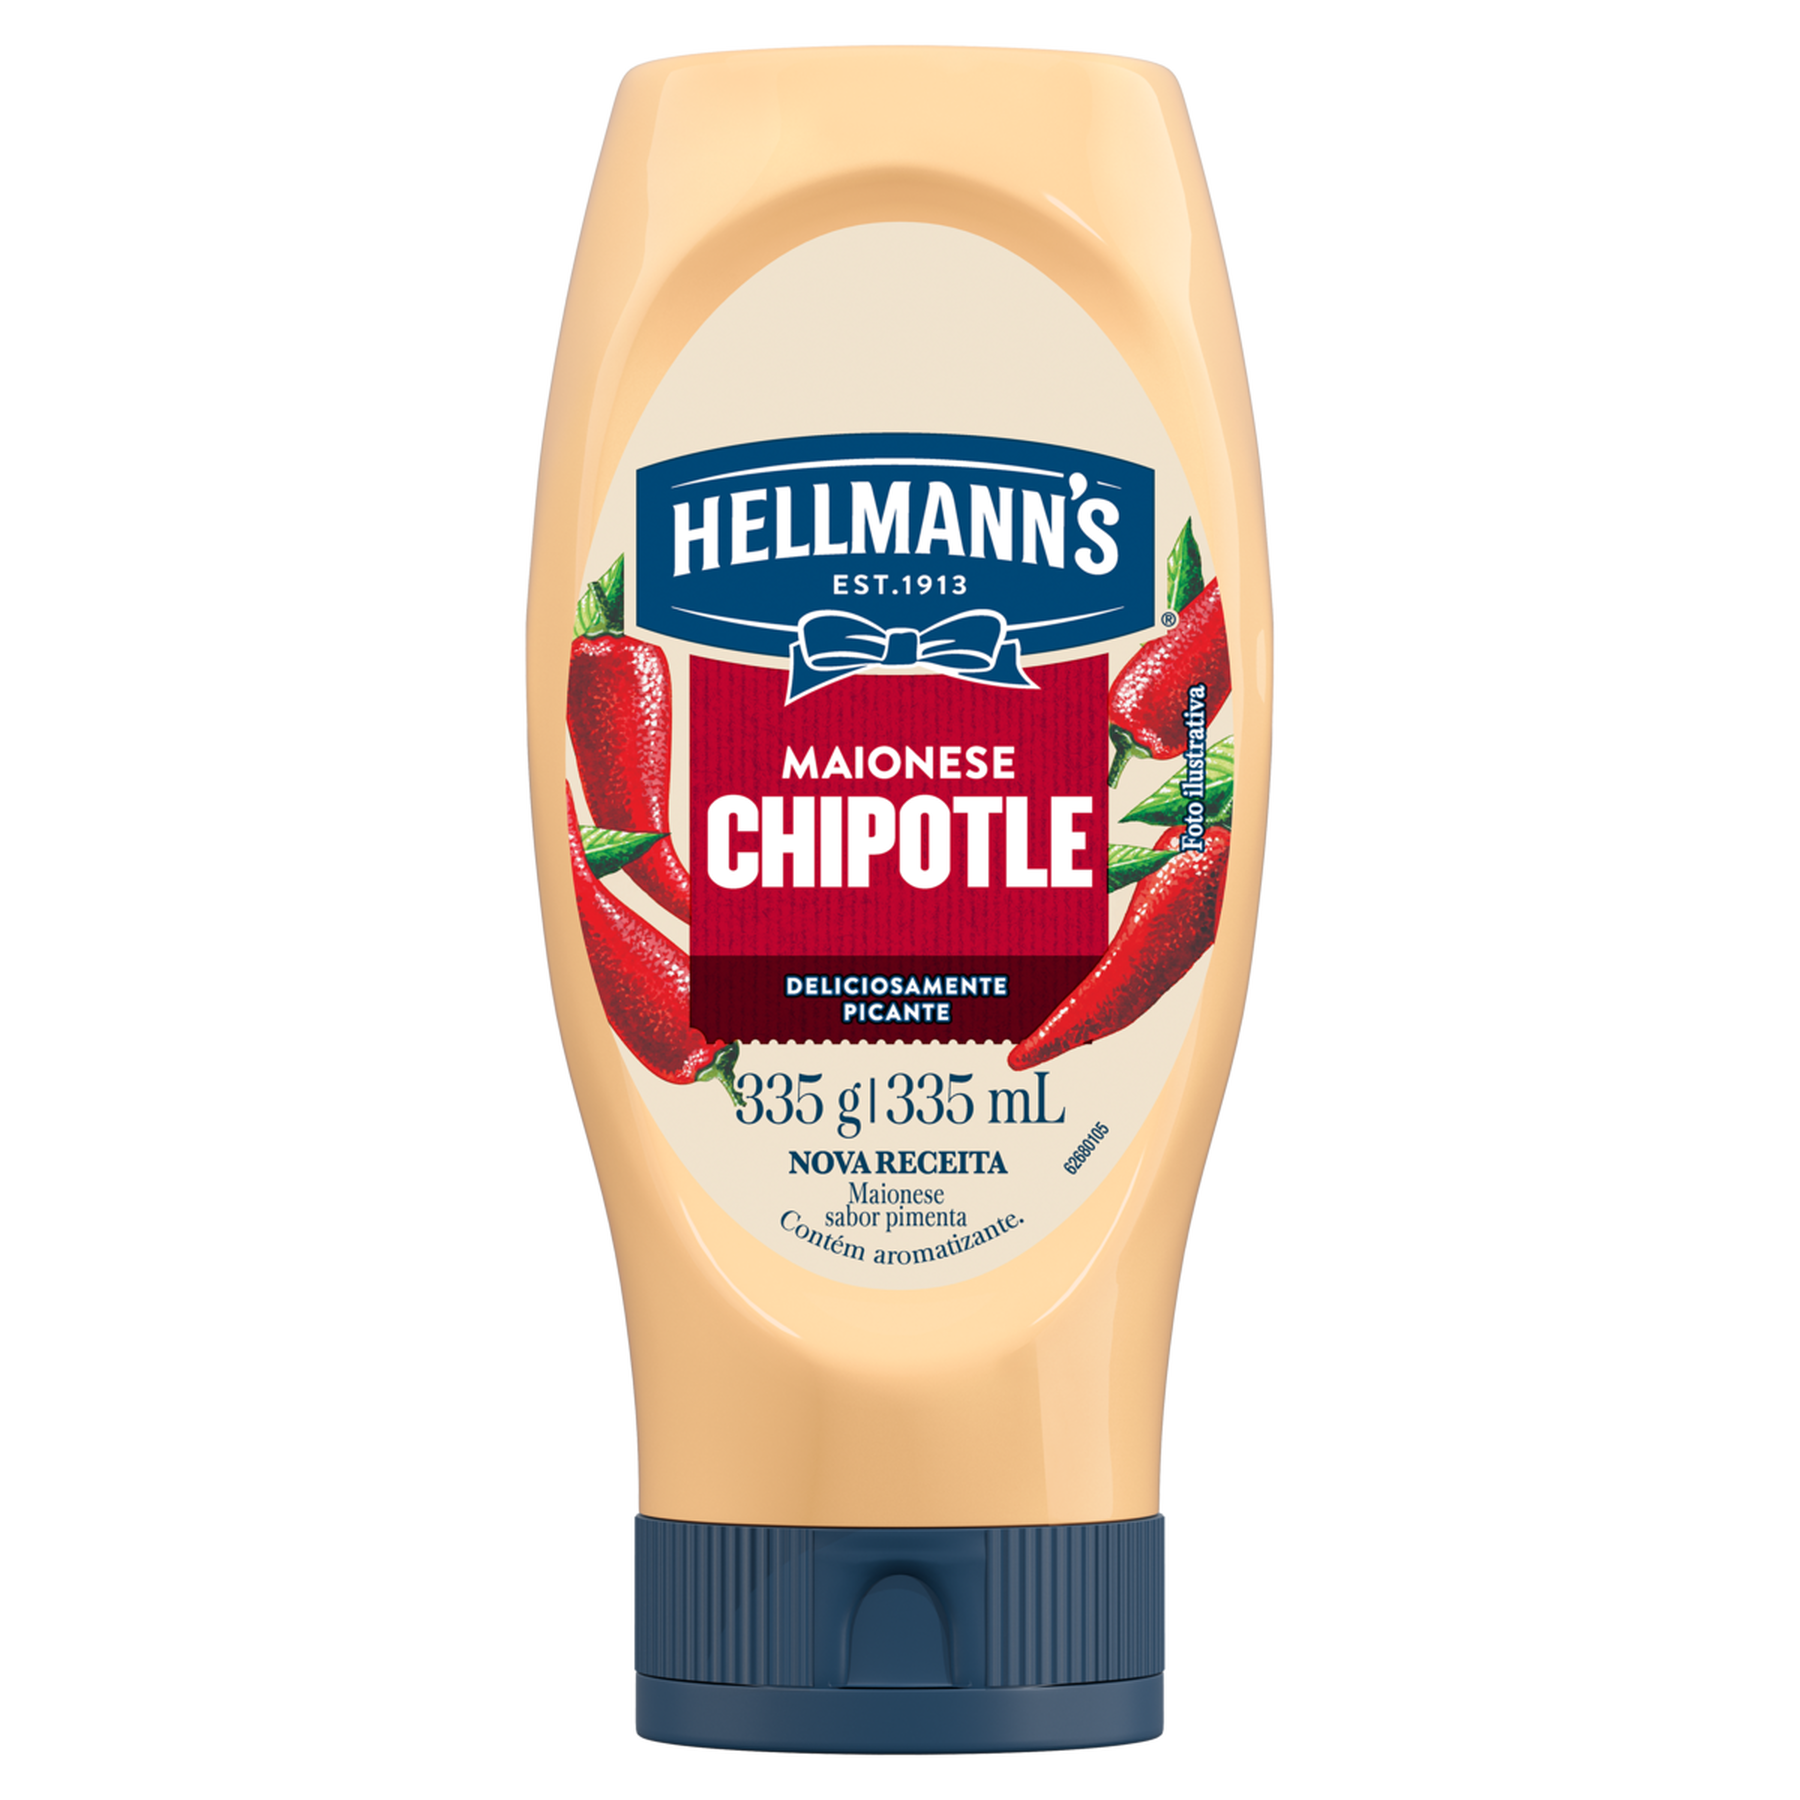 Maionese Chipotle Hellmann's Squeeze 335g